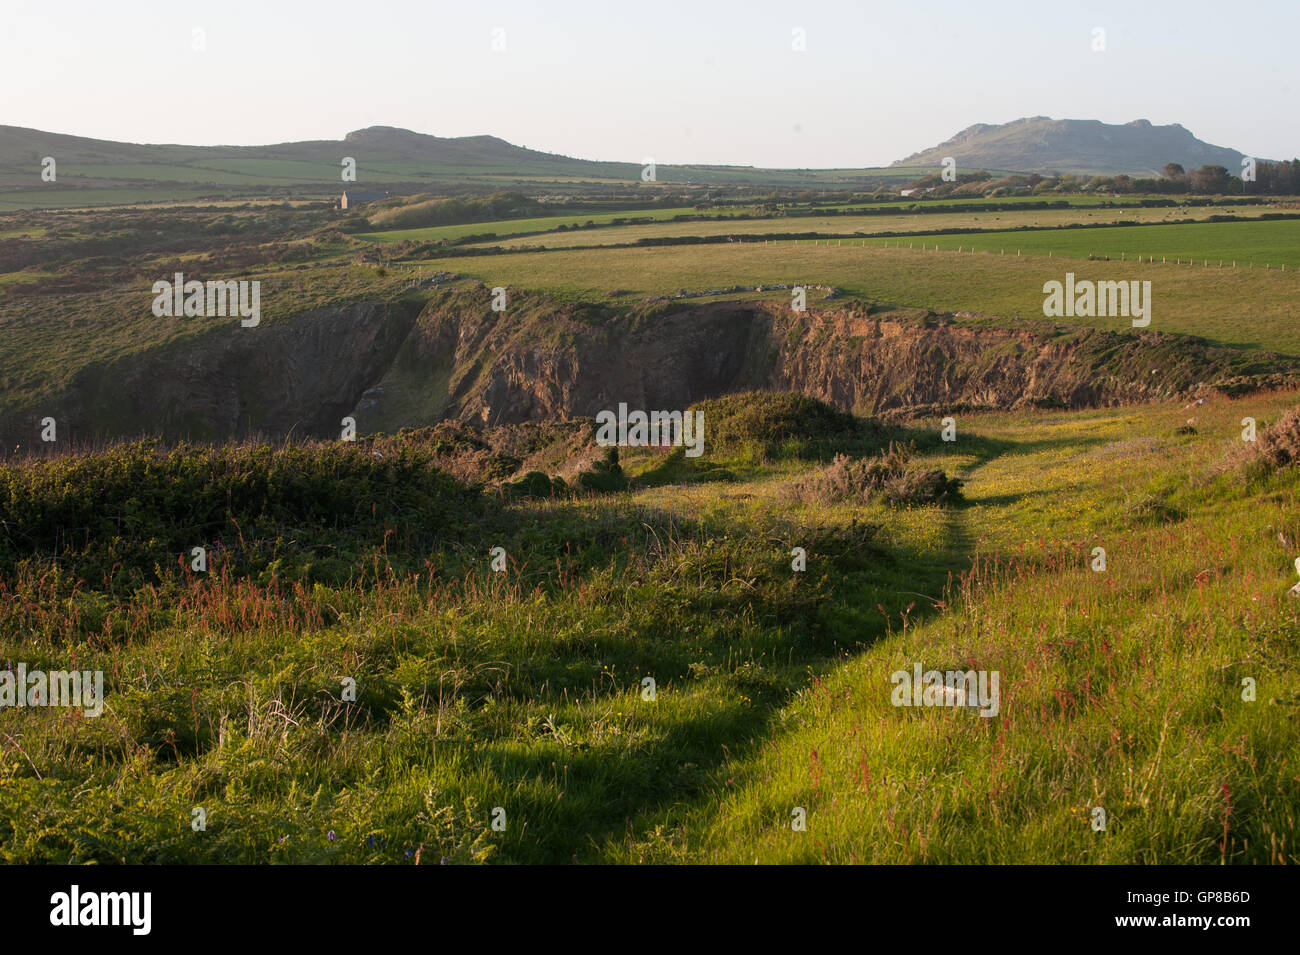 Swansea, Wales, UK. ARCHIVE IMAGES An image of Pembrokeshire coastal path in West Wales during a sunny Summers day in the UK. Stock Photo